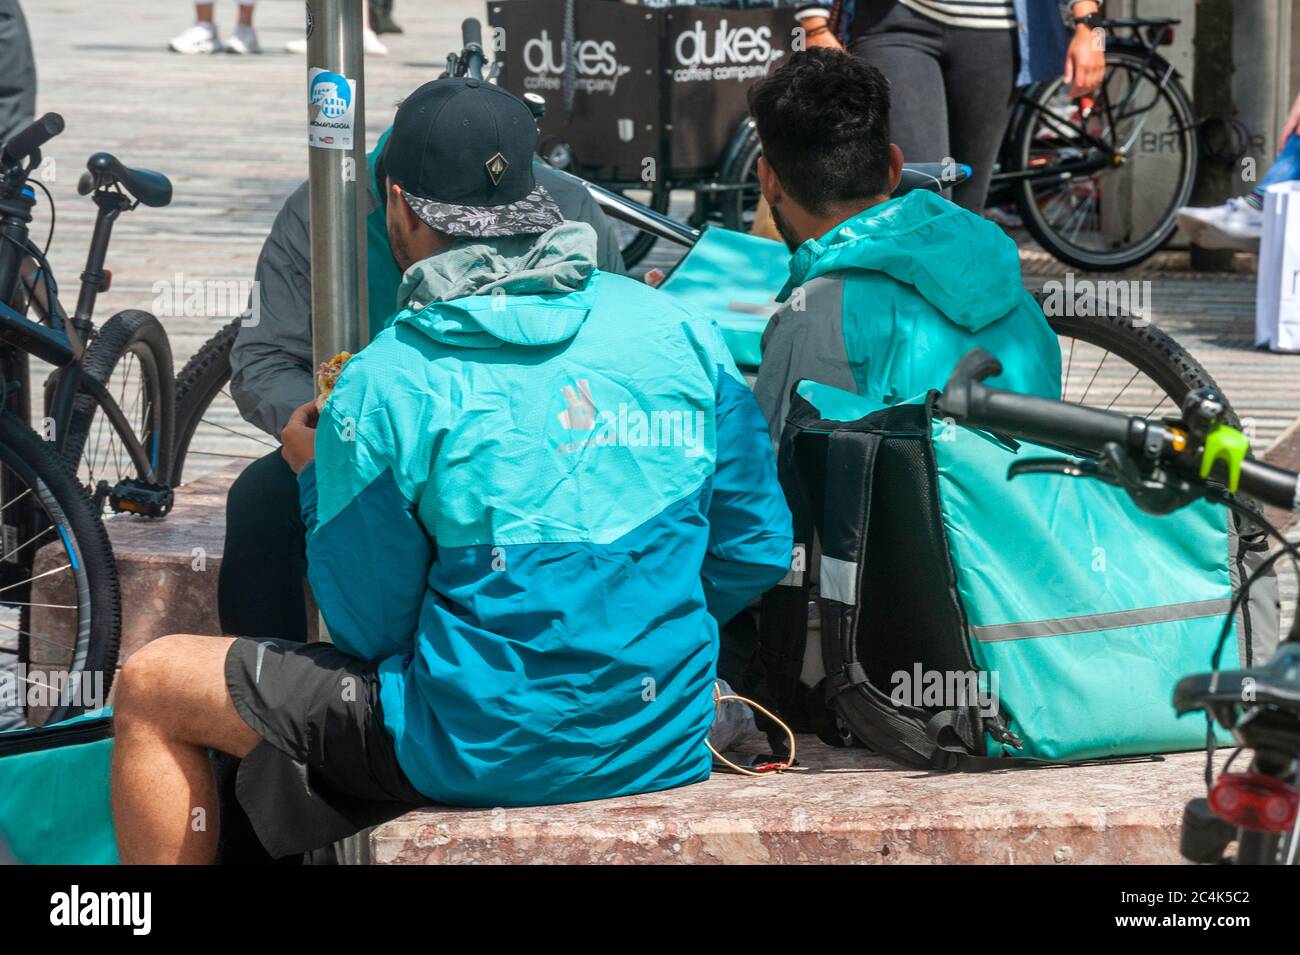 Deliveroo Food Delivery Riders in Cork City, Irland. Stockfoto